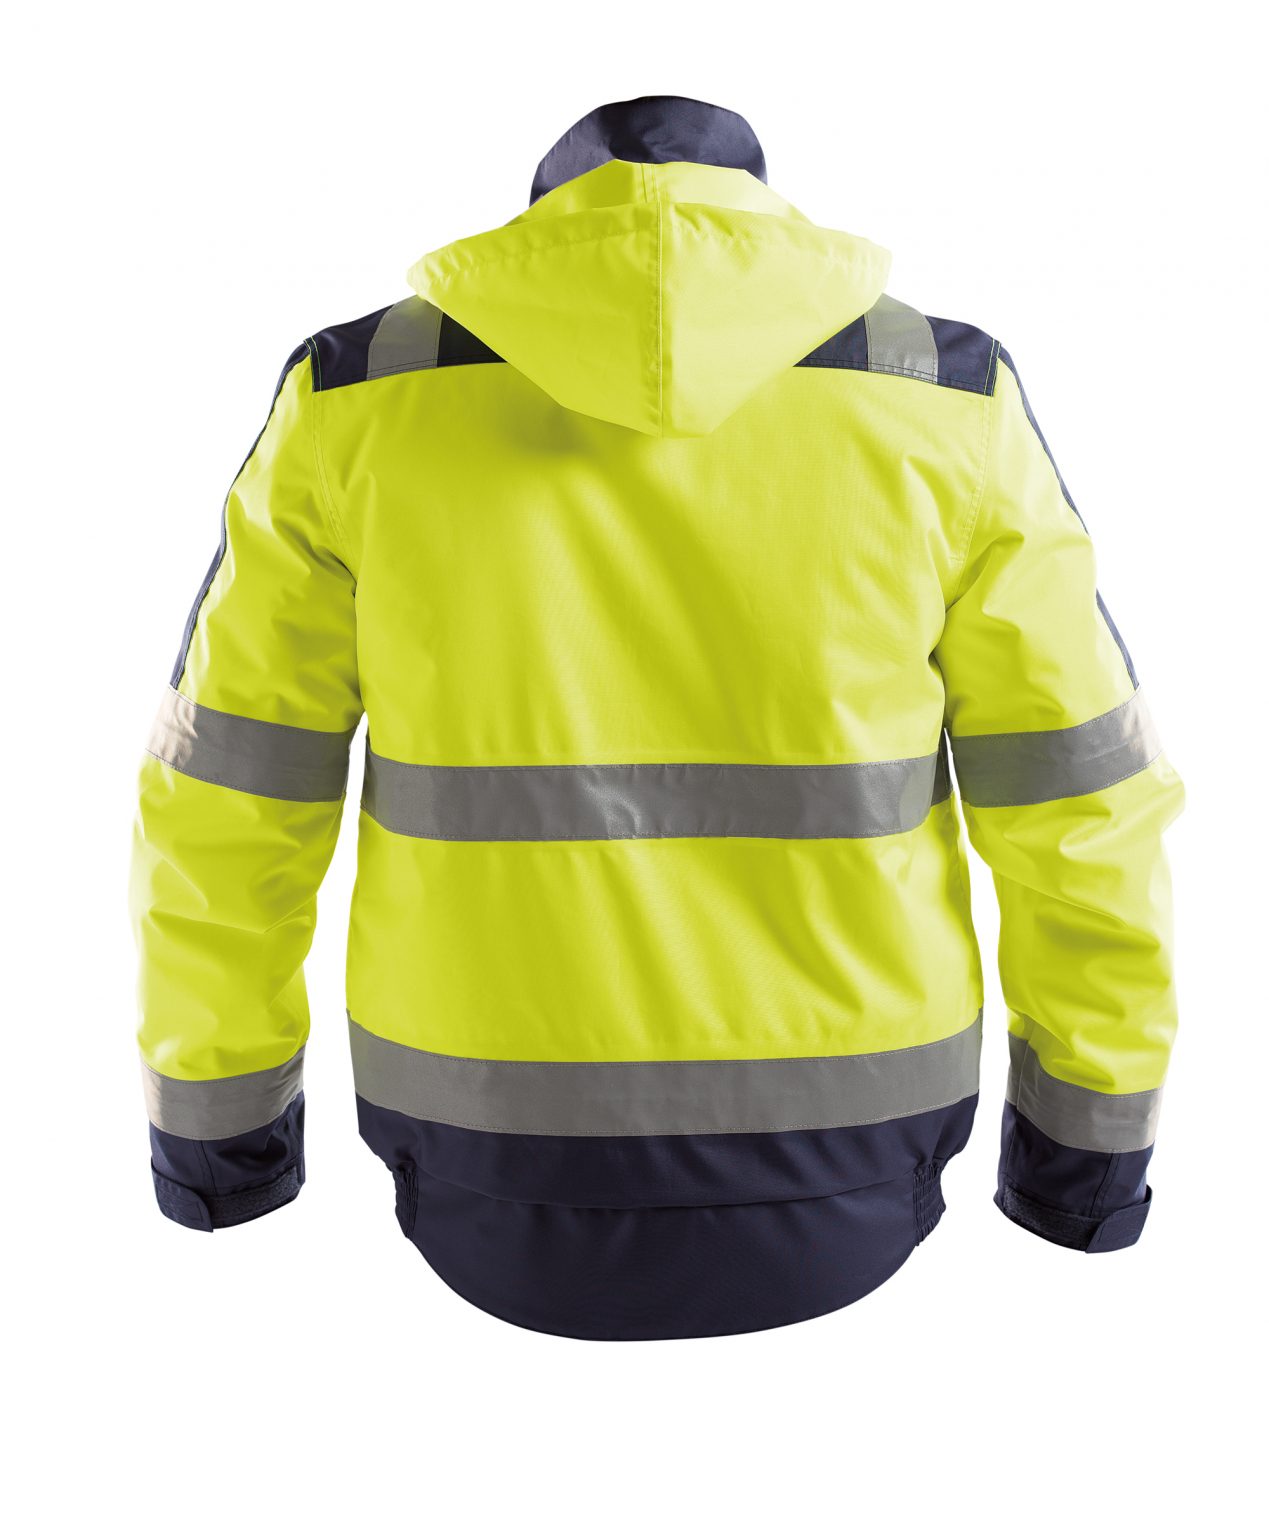 lima high visibility winter jacket fluo yellow navy back 1